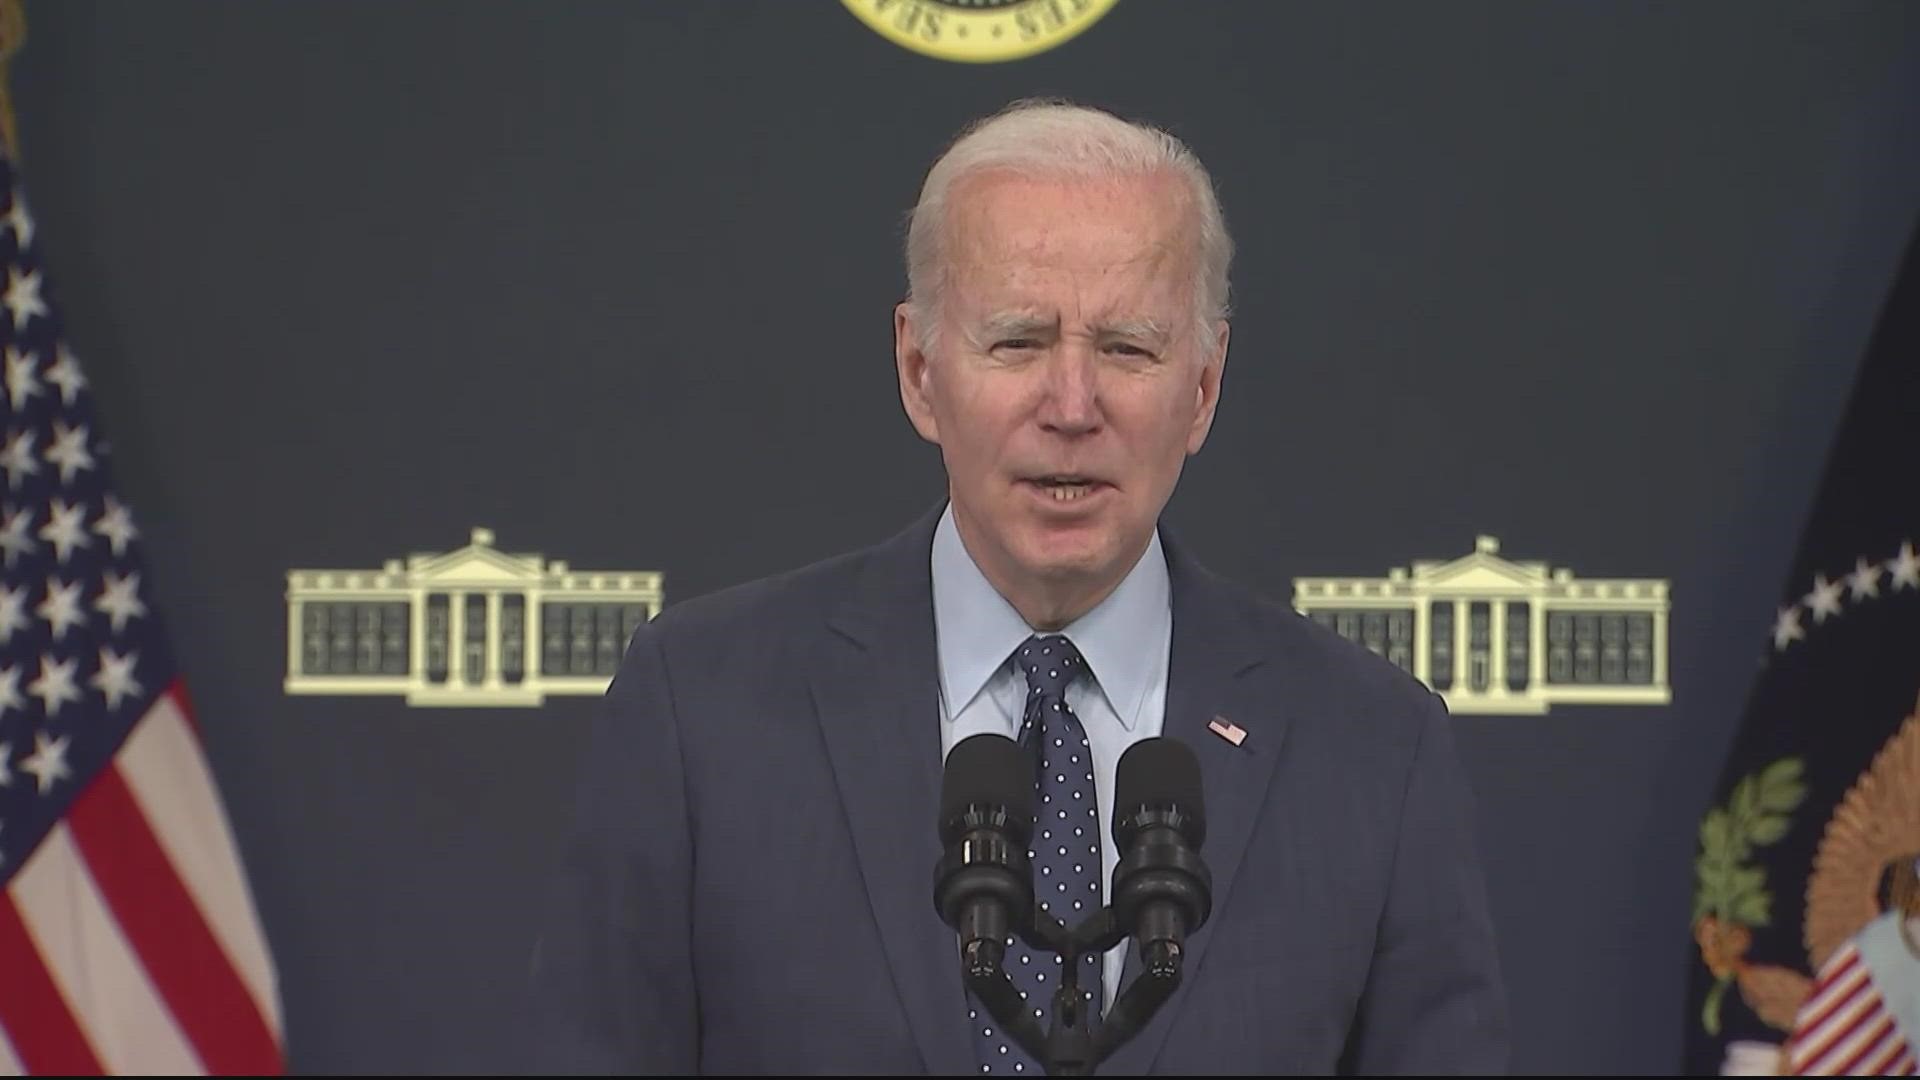 President Biden addressed the nation about the unidentified objects recently shot down by the U-S military.